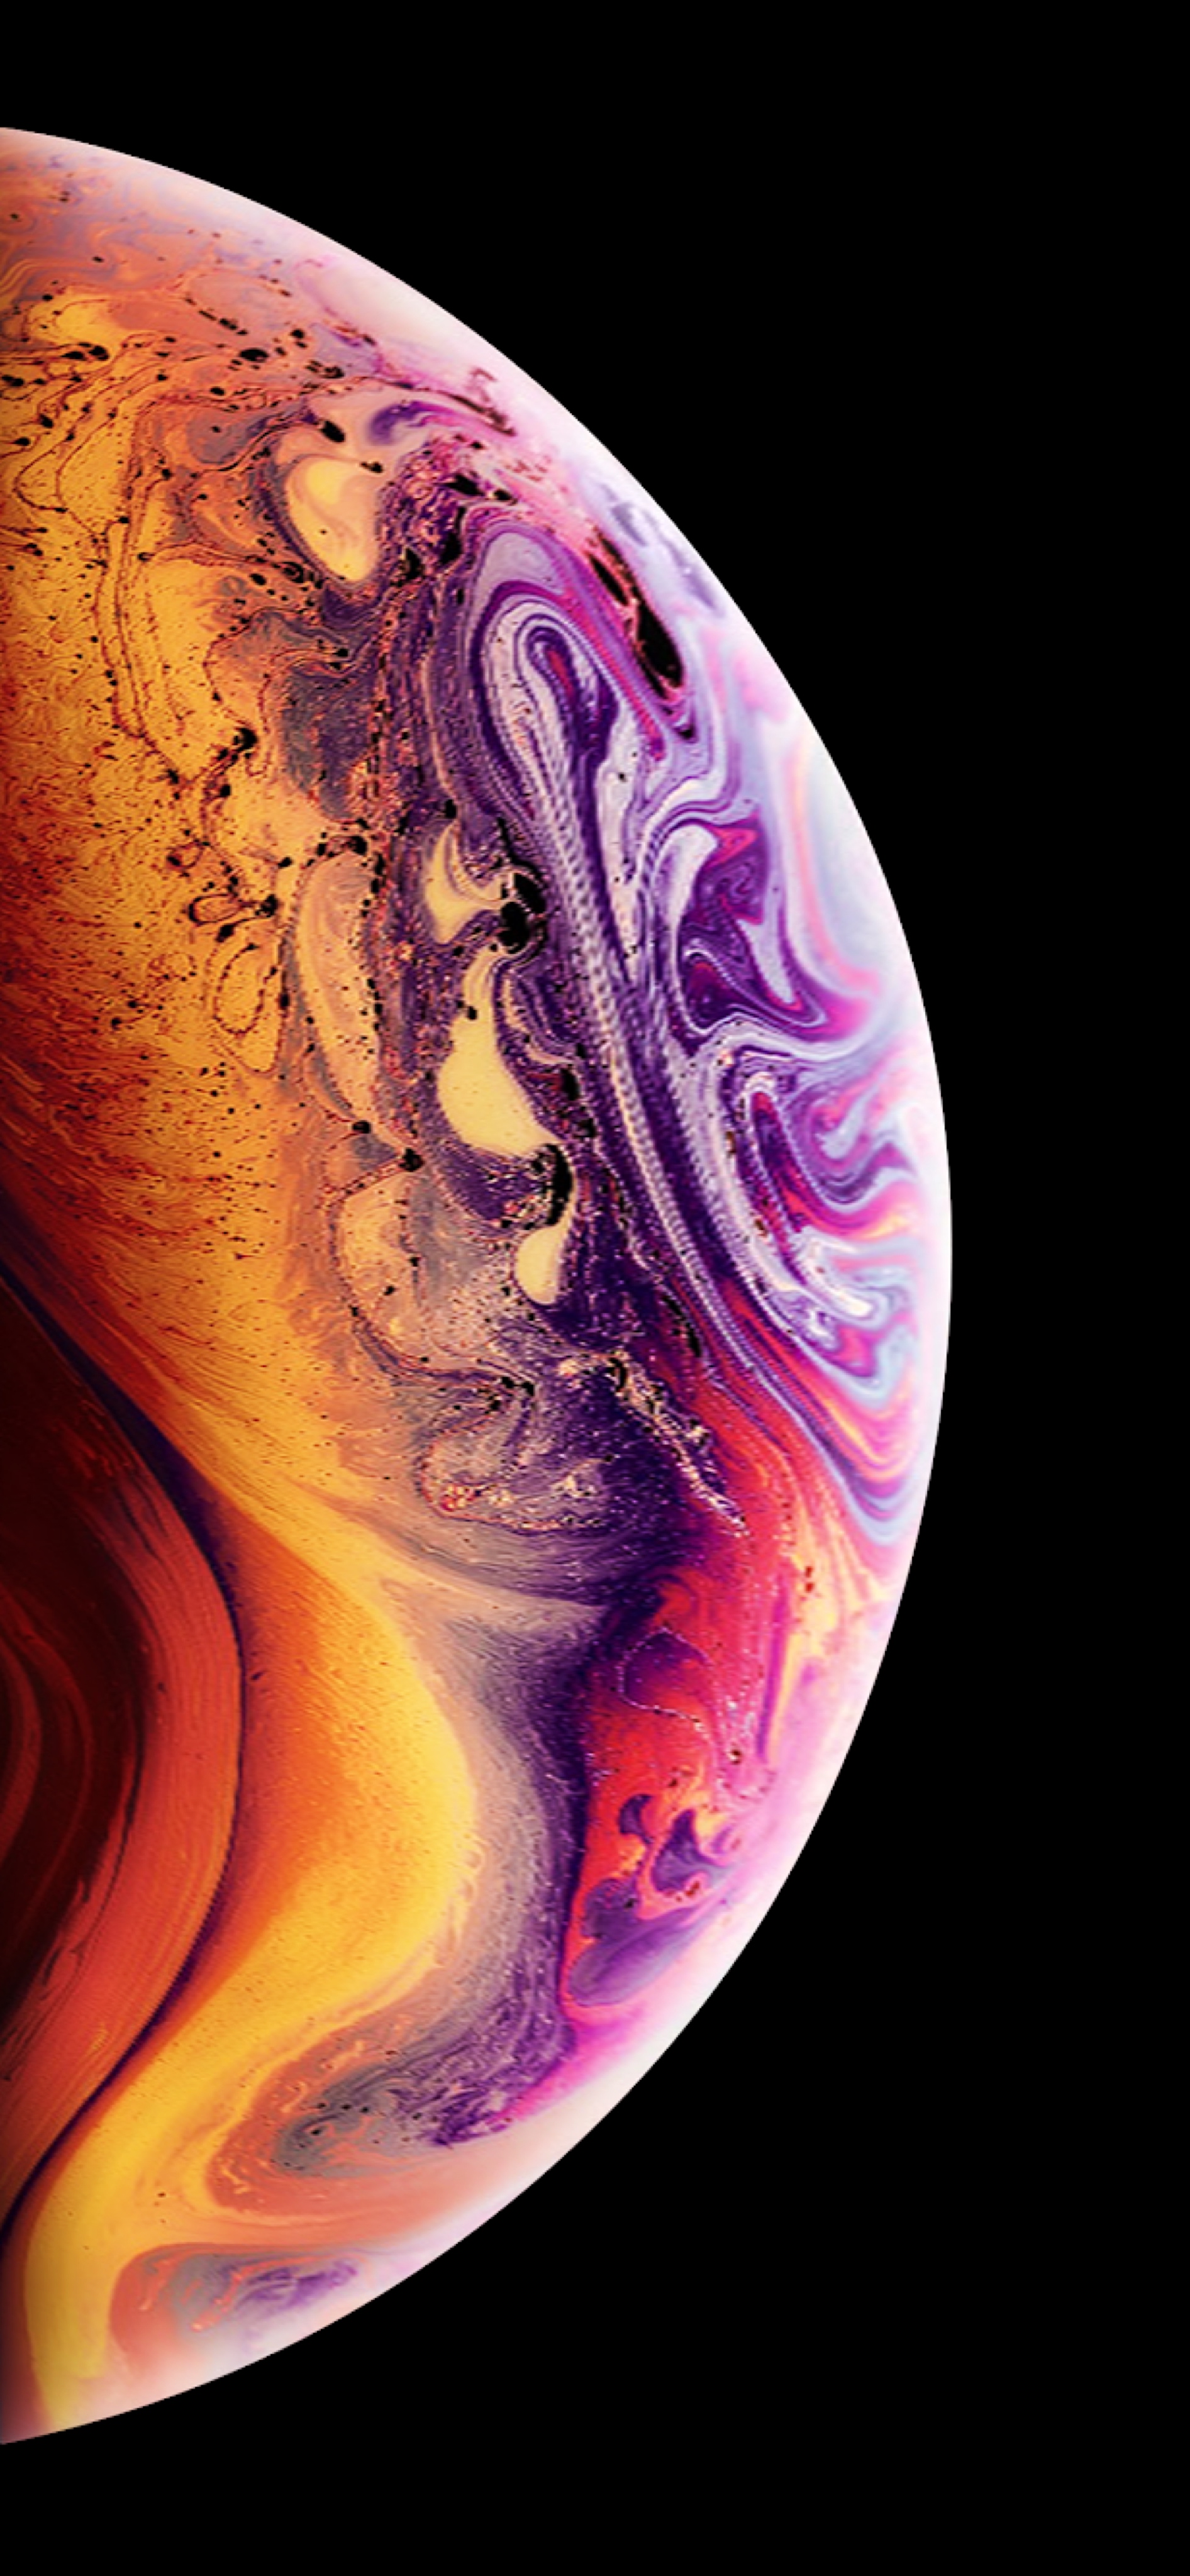 iPhone XS marketing image in its full resolution